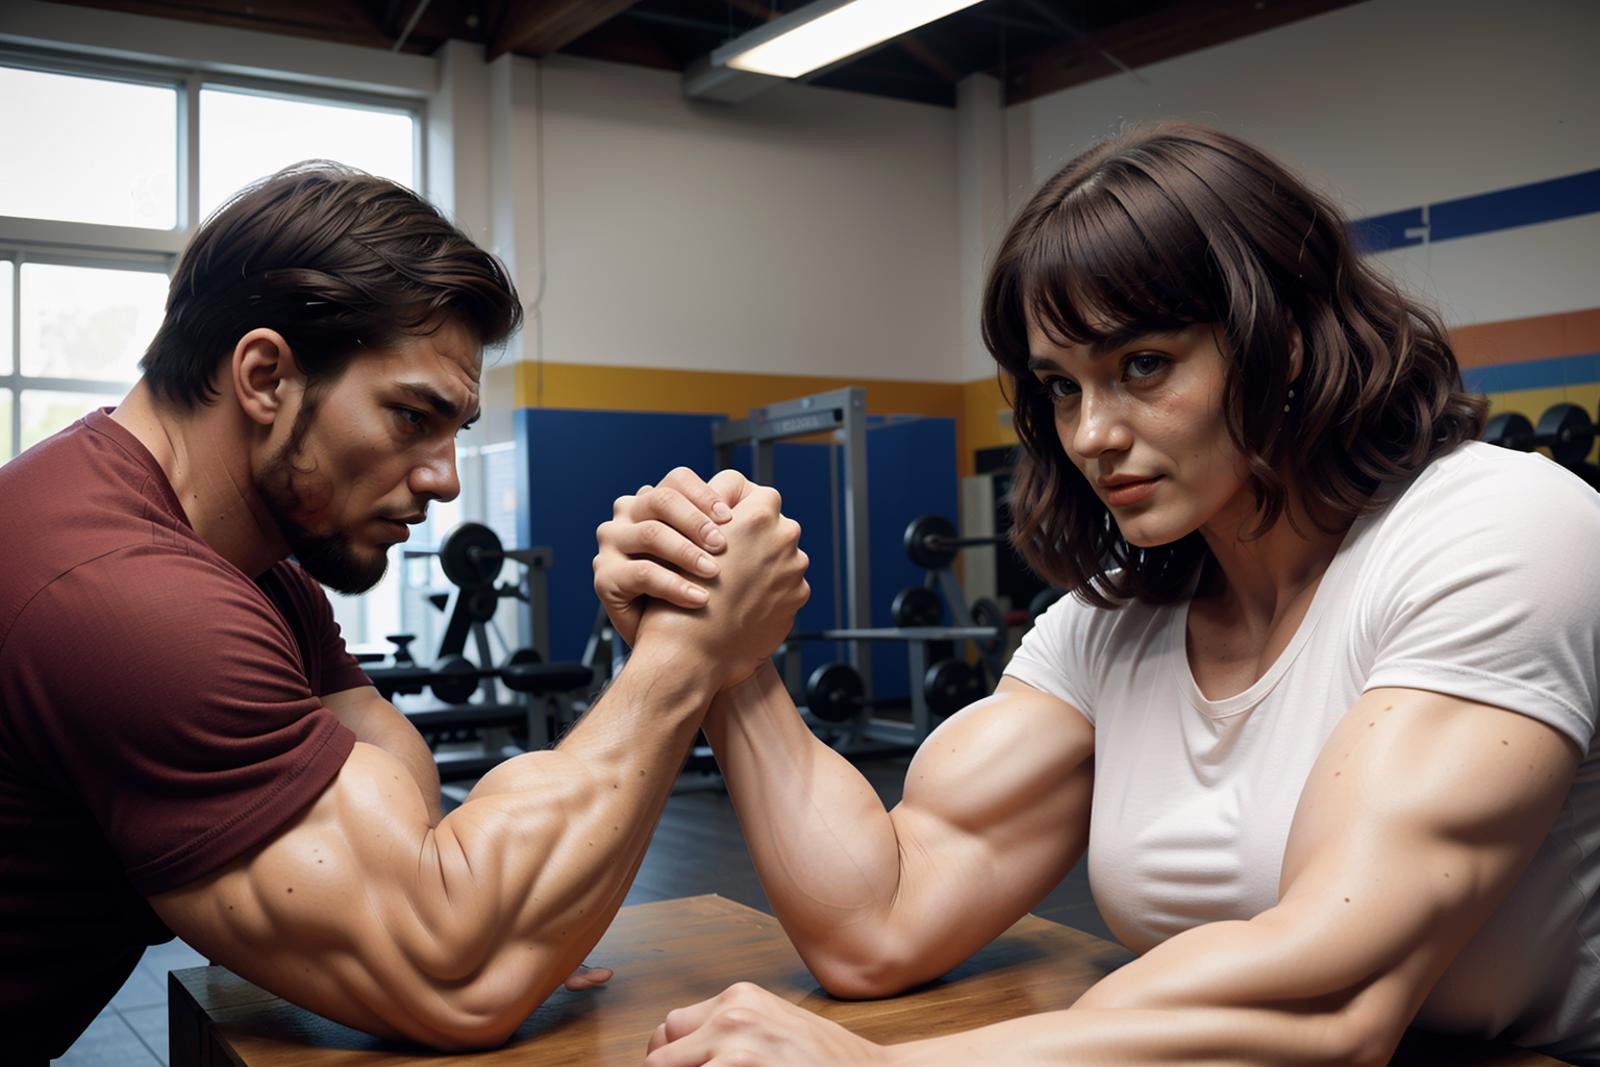 Armwrestling image by Perfection